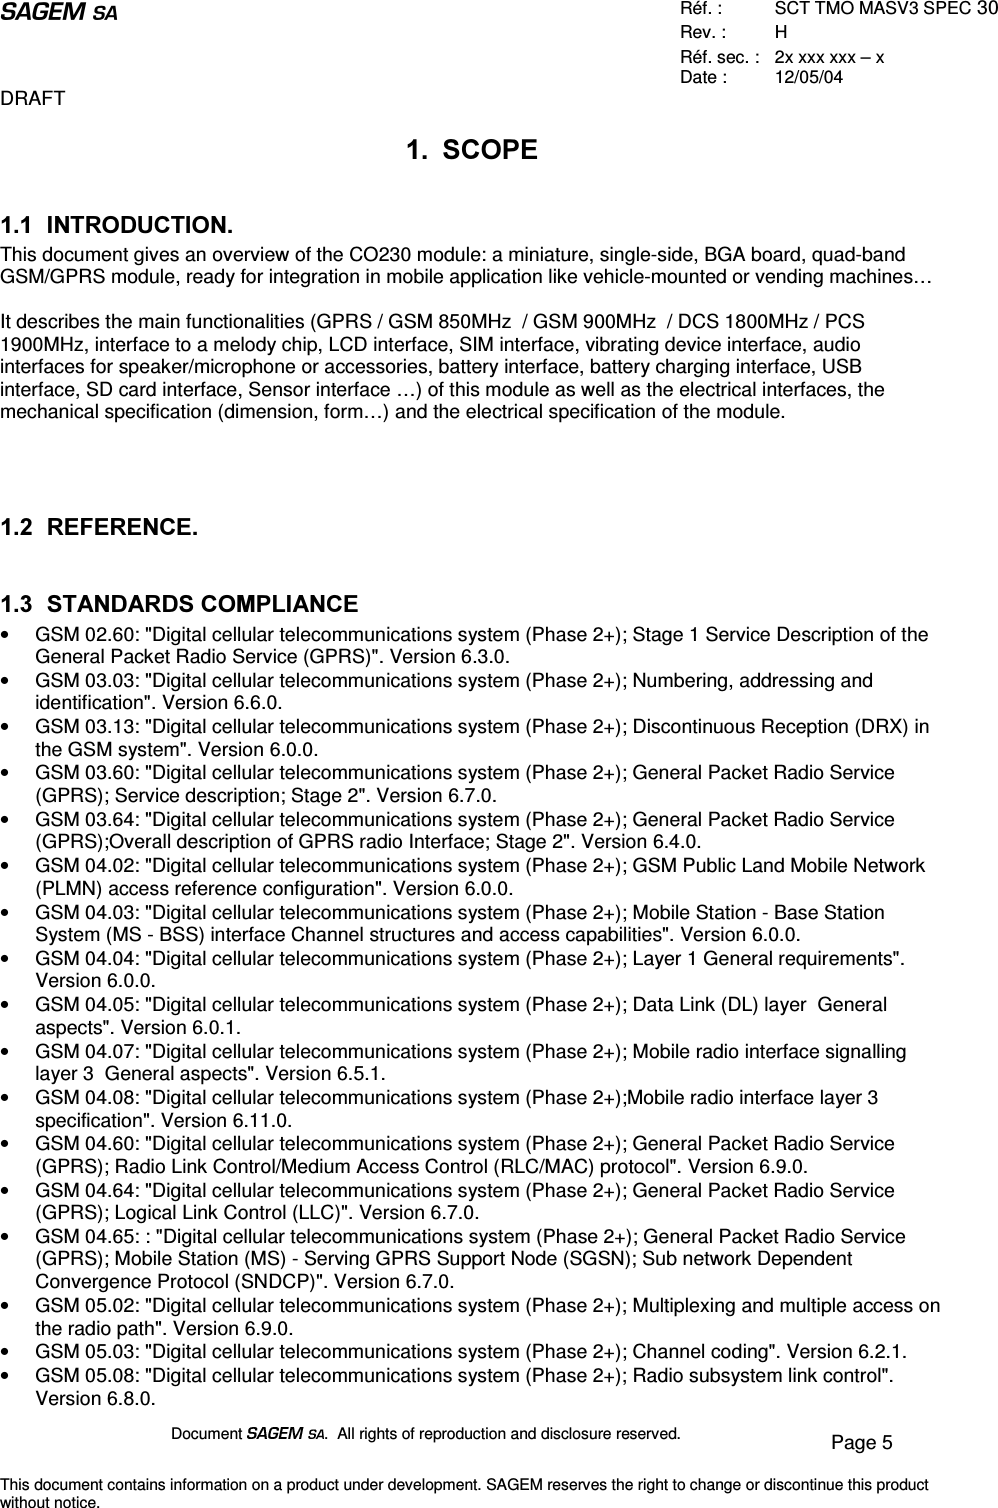  Réf. :  SCT TMO MASV3 SPEC 30 Rev. :  H Réf. sec. :  2x xxx xxx – x Date :  12/05/04 DRAFT Document  .  All rights of reproduction and disclosure reserved.  Page 5 This document contains information on a product under development. SAGEM reserves the right to change or discontinue this product without notice.  6&amp;23( ,1752&apos;8&amp;7,21This document gives an overview of the CO230 module: a miniature, single-side, BGA board, quad-band GSM/GPRS module, ready for integration in mobile application like vehicle-mounted or vending machines…  It describes the main functionalities (GPRS / GSM 850MHz  / GSM 900MHz  / DCS 1800MHz / PCS 1900MHz, interface to a melody chip, LCD interface, SIM interface, vibrating device interface, audio interfaces for speaker/microphone or accessories, battery interface, battery charging interface, USB interface, SD card interface, Sensor interface …) of this module as well as the electrical interfaces, the mechanical specification (dimension, form…) and the electrical specification of the module.     5()(5(1&amp;(  67$1&apos;$5&apos;6&amp;203/,$1&amp;(•  GSM 02.60: &quot;Digital cellular telecommunications system (Phase 2+); Stage 1 Service Description of the General Packet Radio Service (GPRS)&quot;. Version 6.3.0. •  GSM 03.03: &quot;Digital cellular telecommunications system (Phase 2+); Numbering, addressing and identification&quot;. Version 6.6.0. •  GSM 03.13: &quot;Digital cellular telecommunications system (Phase 2+); Discontinuous Reception (DRX) in the GSM system&quot;. Version 6.0.0. •  GSM 03.60: &quot;Digital cellular telecommunications system (Phase 2+); General Packet Radio Service (GPRS); Service description; Stage 2&quot;. Version 6.7.0. •  GSM 03.64: &quot;Digital cellular telecommunications system (Phase 2+); General Packet Radio Service (GPRS);Overall description of GPRS radio Interface; Stage 2&quot;. Version 6.4.0. •  GSM 04.02: &quot;Digital cellular telecommunications system (Phase 2+); GSM Public Land Mobile Network (PLMN) access reference configuration&quot;. Version 6.0.0. •  GSM 04.03: &quot;Digital cellular telecommunications system (Phase 2+); Mobile Station - Base Station System (MS - BSS) interface Channel structures and access capabilities&quot;. Version 6.0.0. •  GSM 04.04: &quot;Digital cellular telecommunications system (Phase 2+); Layer 1 General requirements&quot;. Version 6.0.0. •  GSM 04.05: &quot;Digital cellular telecommunications system (Phase 2+); Data Link (DL) layer  General aspects&quot;. Version 6.0.1. •  GSM 04.07: &quot;Digital cellular telecommunications system (Phase 2+); Mobile radio interface signalling layer 3  General aspects&quot;. Version 6.5.1. •  GSM 04.08: &quot;Digital cellular telecommunications system (Phase 2+);Mobile radio interface layer 3 specification&quot;. Version 6.11.0. •  GSM 04.60: &quot;Digital cellular telecommunications system (Phase 2+); General Packet Radio Service (GPRS); Radio Link Control/Medium Access Control (RLC/MAC) protocol&quot;. Version 6.9.0. •  GSM 04.64: &quot;Digital cellular telecommunications system (Phase 2+); General Packet Radio Service (GPRS); Logical Link Control (LLC)&quot;. Version 6.7.0. •  GSM 04.65: : &quot;Digital cellular telecommunications system (Phase 2+); General Packet Radio Service (GPRS); Mobile Station (MS) - Serving GPRS Support Node (SGSN); Sub network Dependent Convergence Protocol (SNDCP)&quot;. Version 6.7.0. •  GSM 05.02: &quot;Digital cellular telecommunications system (Phase 2+); Multiplexing and multiple access on the radio path&quot;. Version 6.9.0. •  GSM 05.03: &quot;Digital cellular telecommunications system (Phase 2+); Channel coding&quot;. Version 6.2.1. •  GSM 05.08: &quot;Digital cellular telecommunications system (Phase 2+); Radio subsystem link control&quot;. Version 6.8.0. 